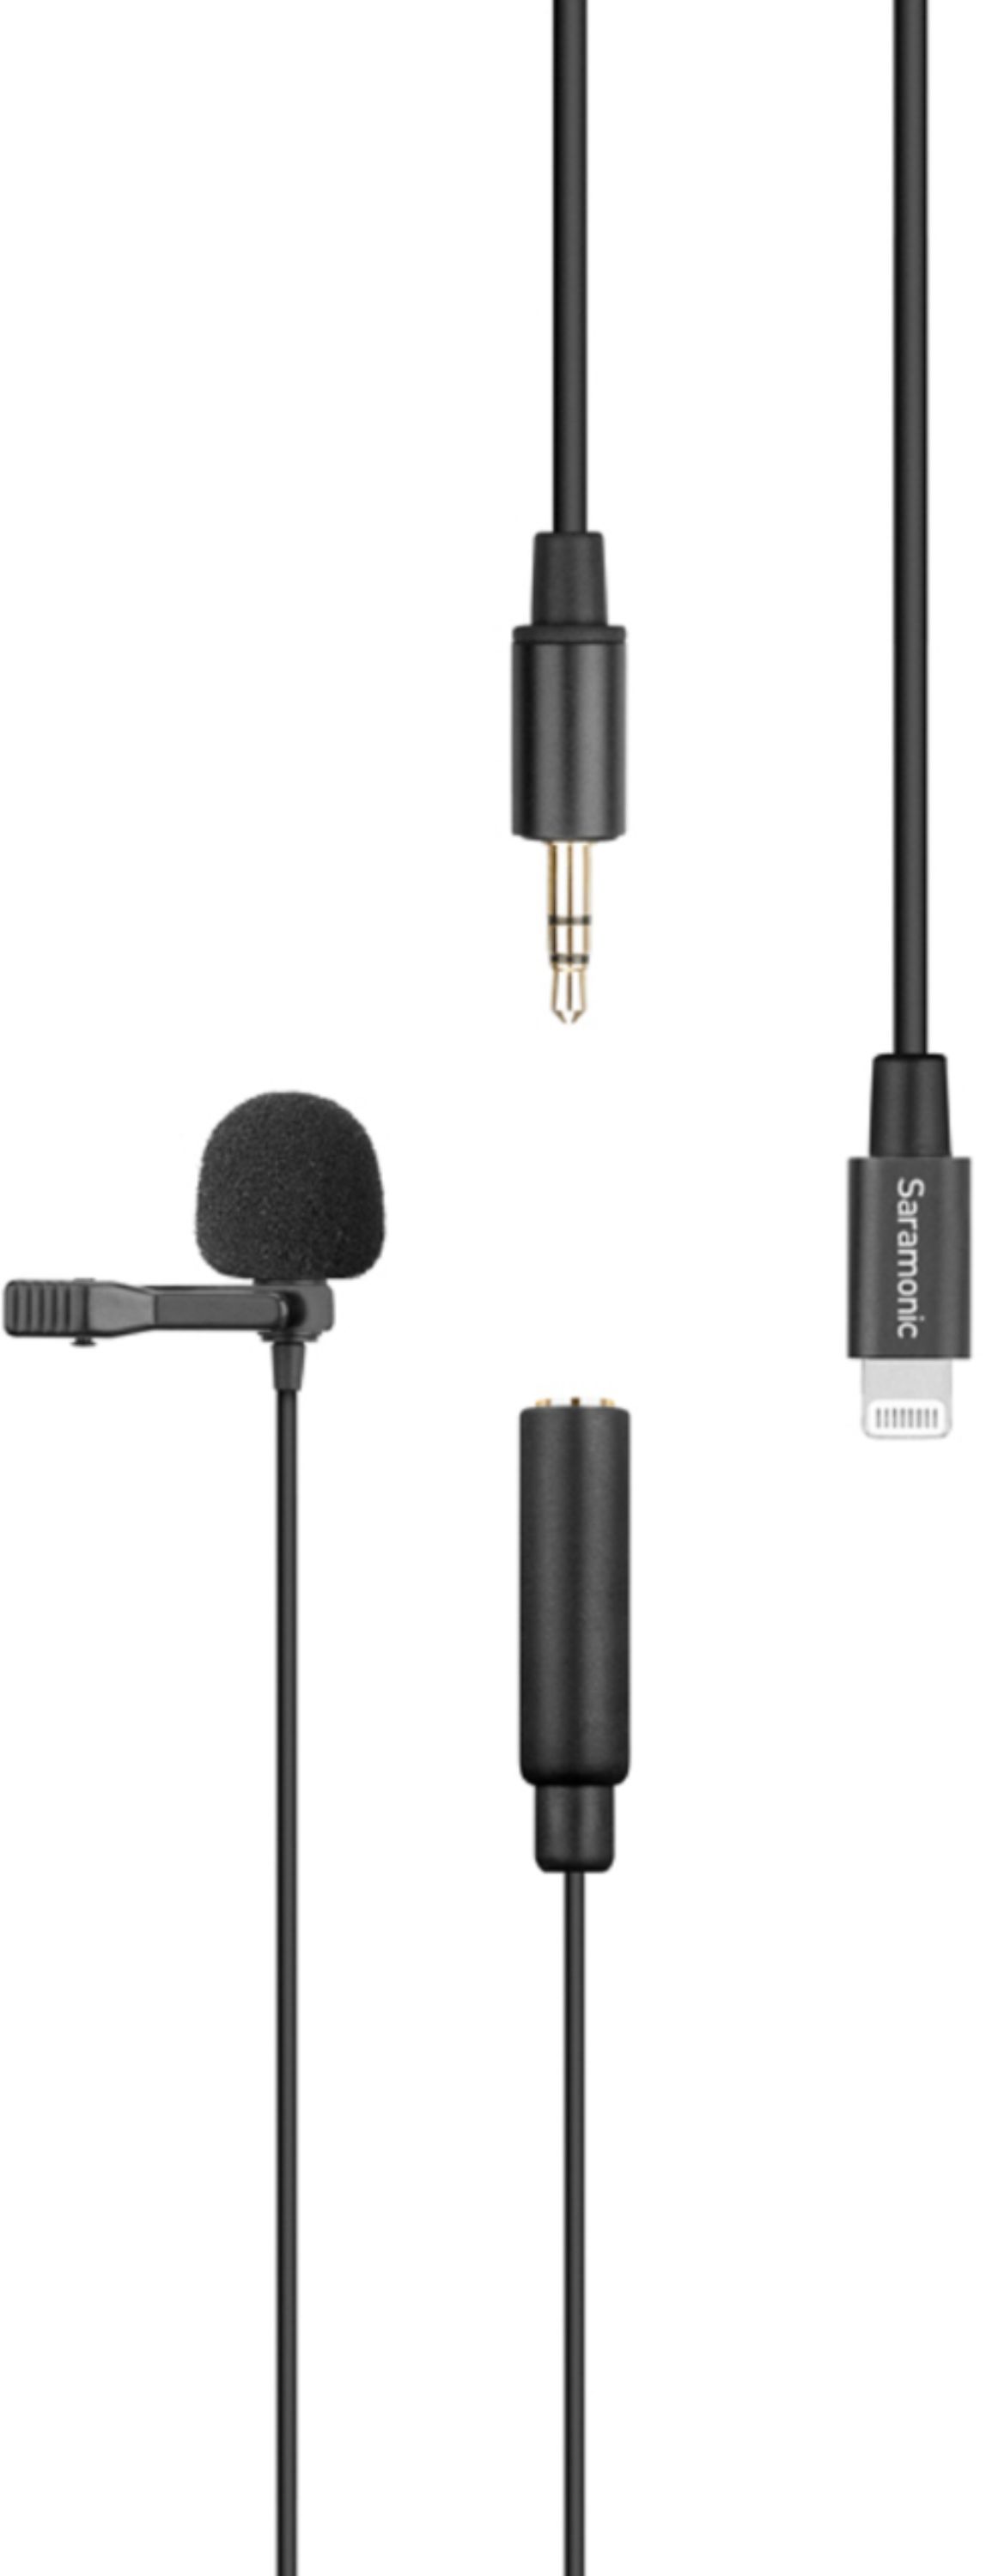 Wireless Lavalier Microphone for iPhone Lapel Microphone Wireless Microphone  Unboxing & instructions 